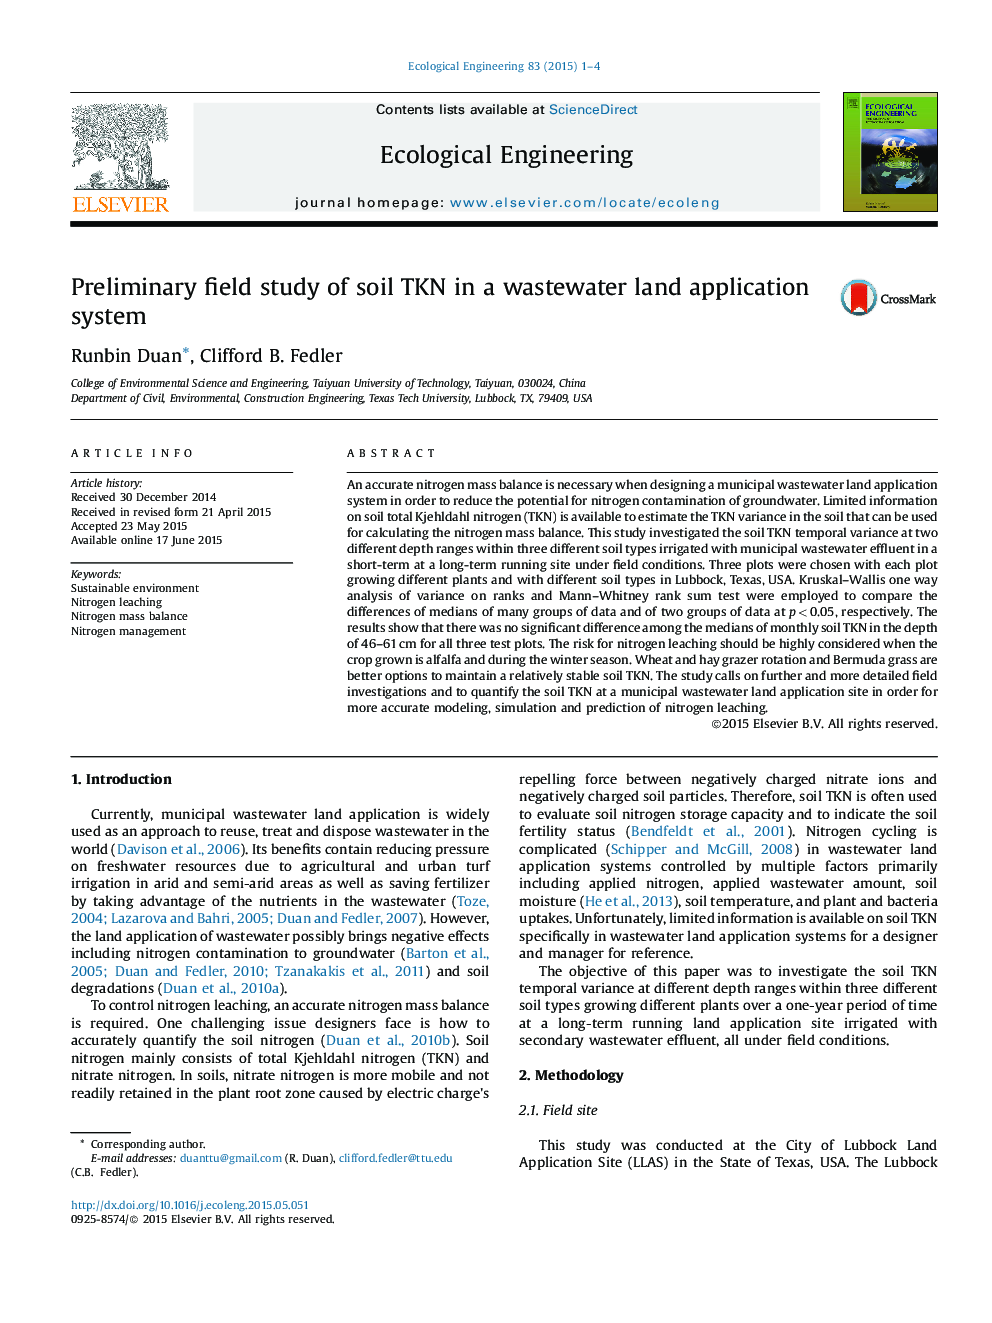 Preliminary field study of soil TKN in a wastewater land application system